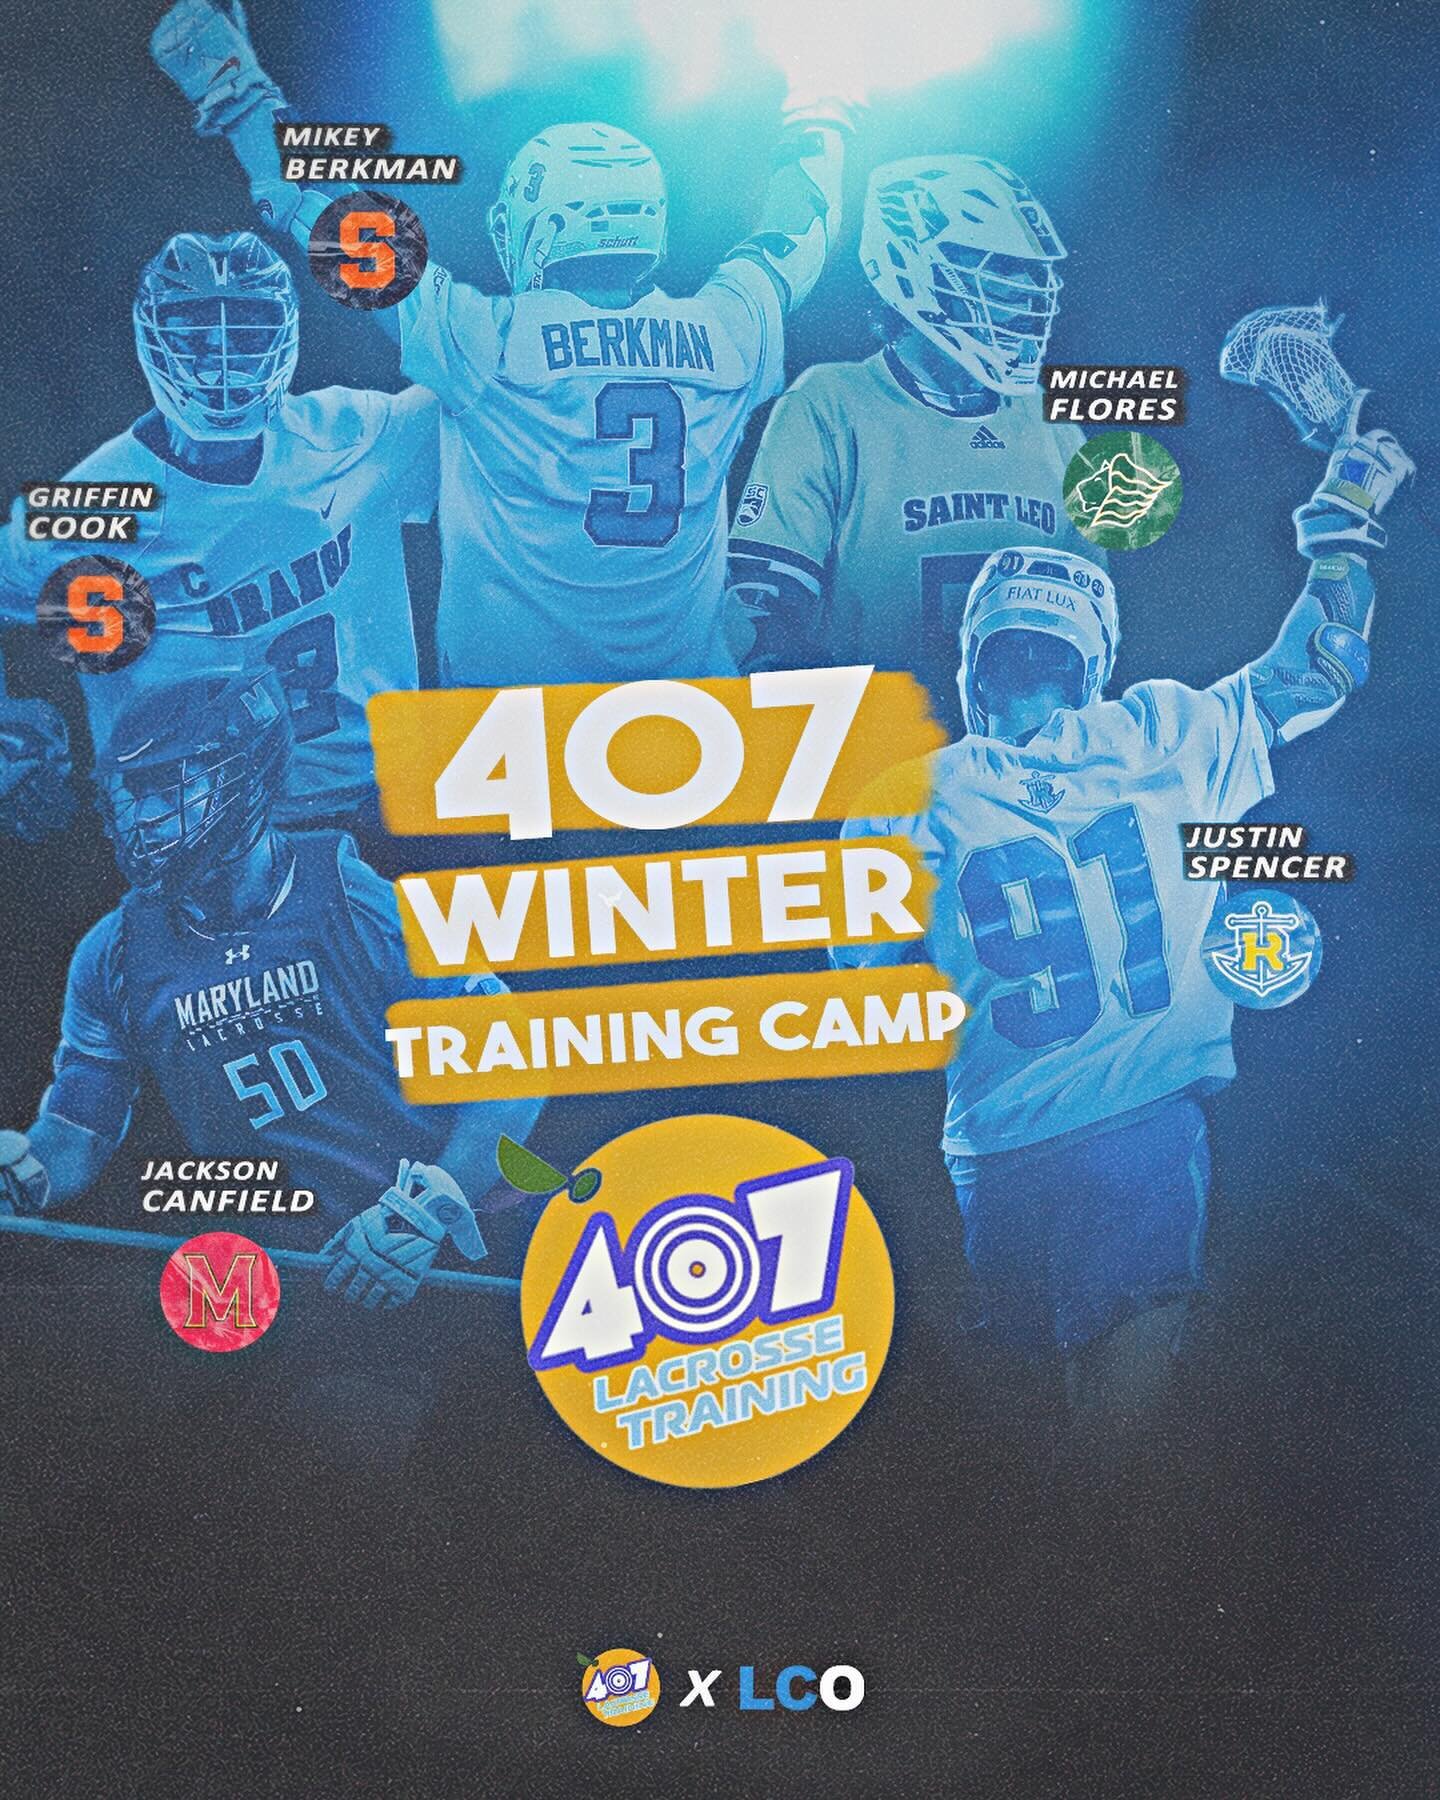 Excited to announce the 407 Winter Training Camp 🍊❄️

🗓️December 19 &amp; 20
📍Trinity Preparatory School
⌚️6-8pm

Learn from experienced D1 &amp; D2 players and get ready for the spring season. Giving away some @adrenalinelacrosse gear and 407 mer